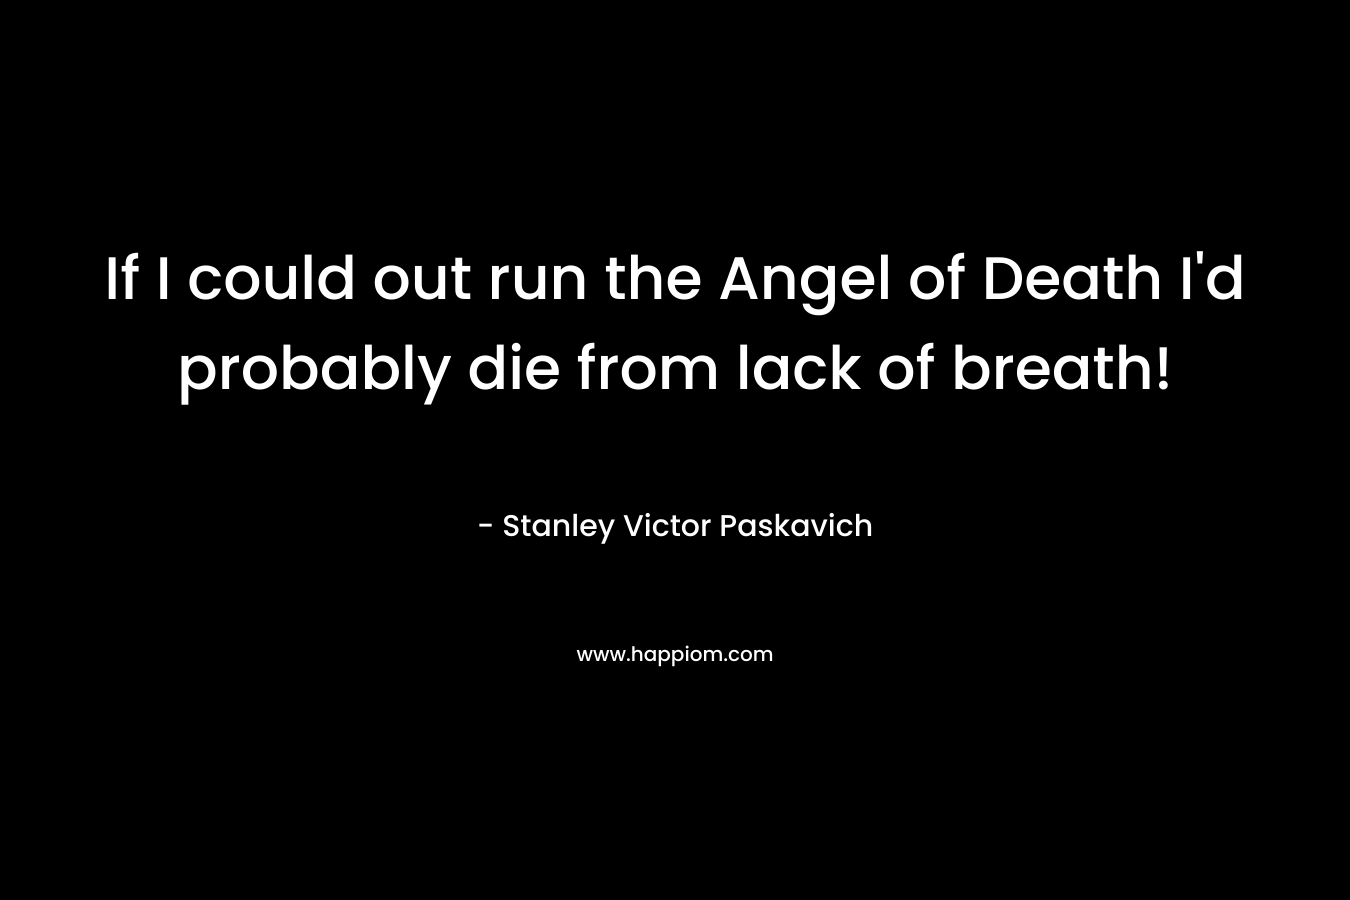 If I could out run the Angel of Death I'd probably die from lack of breath!